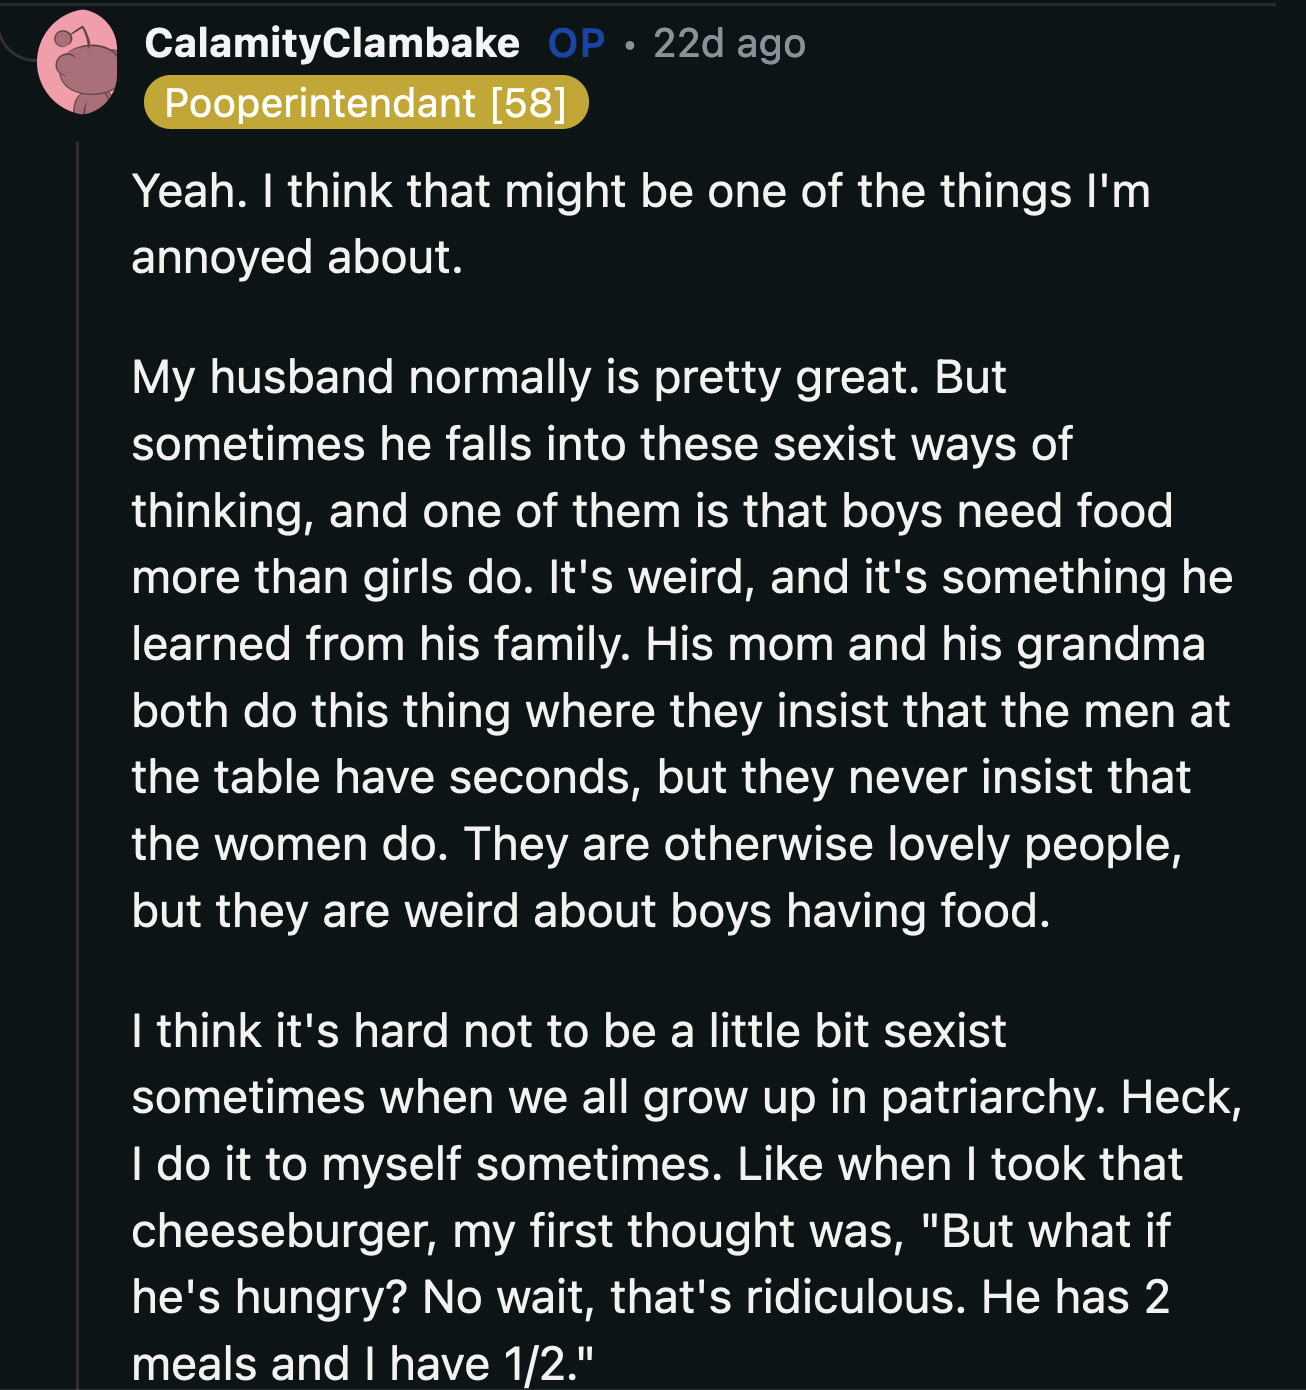 Not only is he selfish, he is sexist, too. He believes that women need less food than men do.